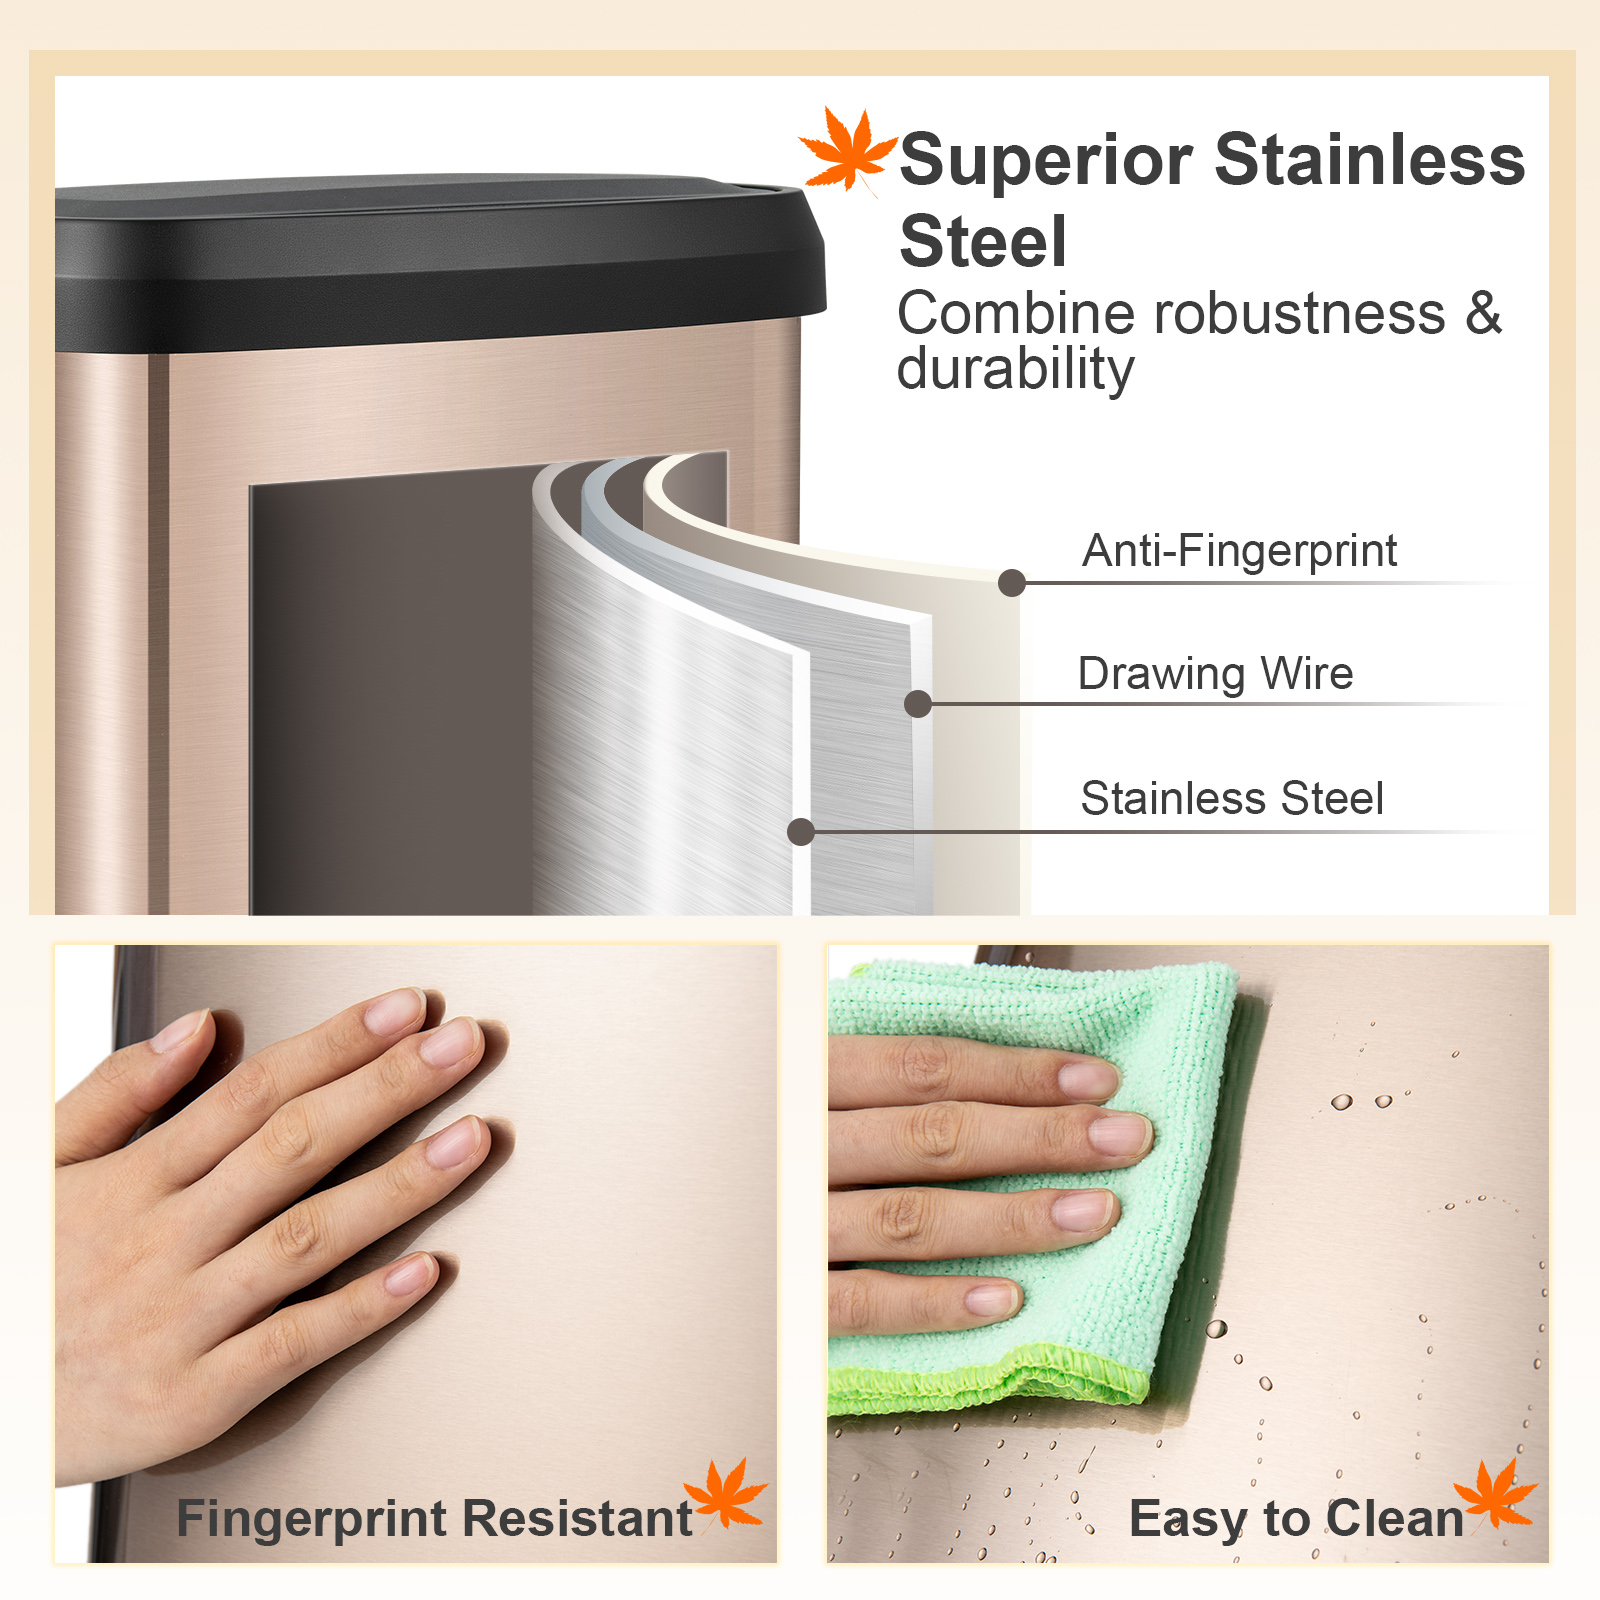 50_L_Stainless_Steel_Step_Trash_Can_with_Soft_Close_Lid__Deodorizer_Compartment_Gold-10.jpg